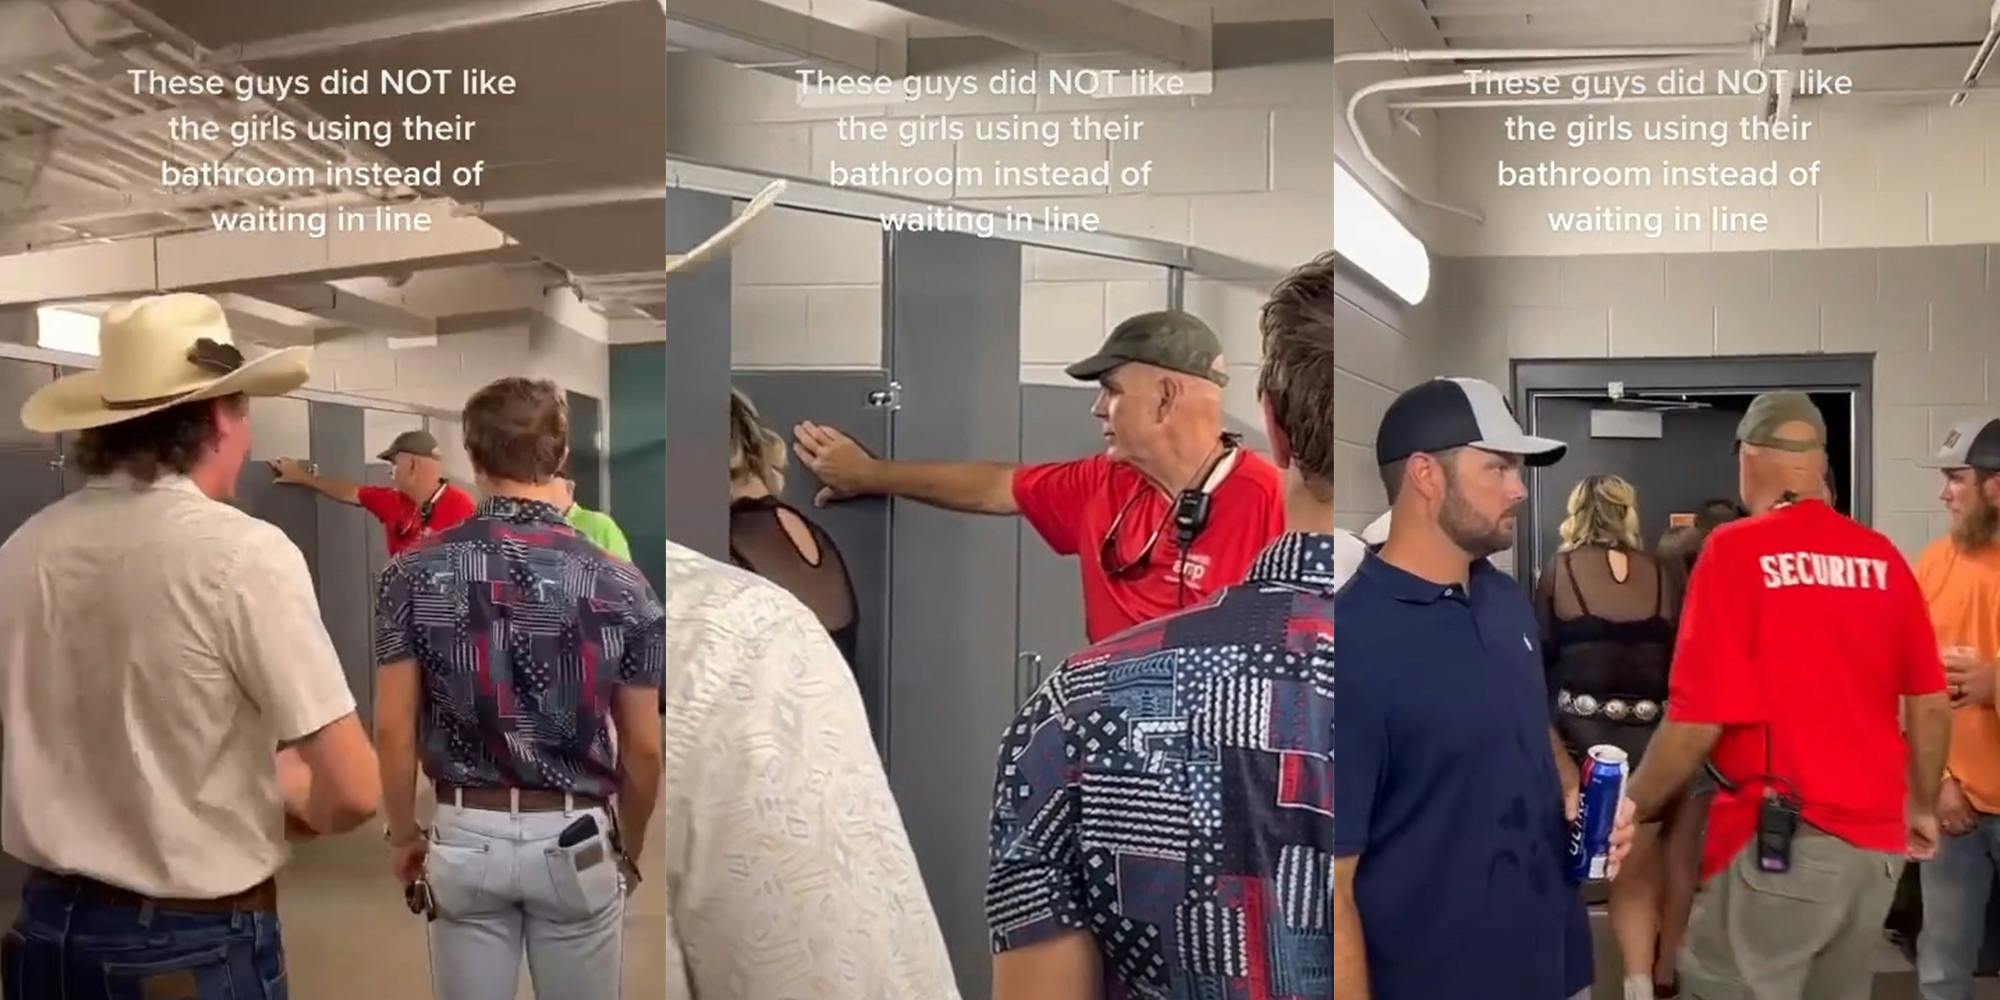 security guard ushering women from men's room with caption "These guys did NOT like the girls using their bathroom instead of waiting in line"